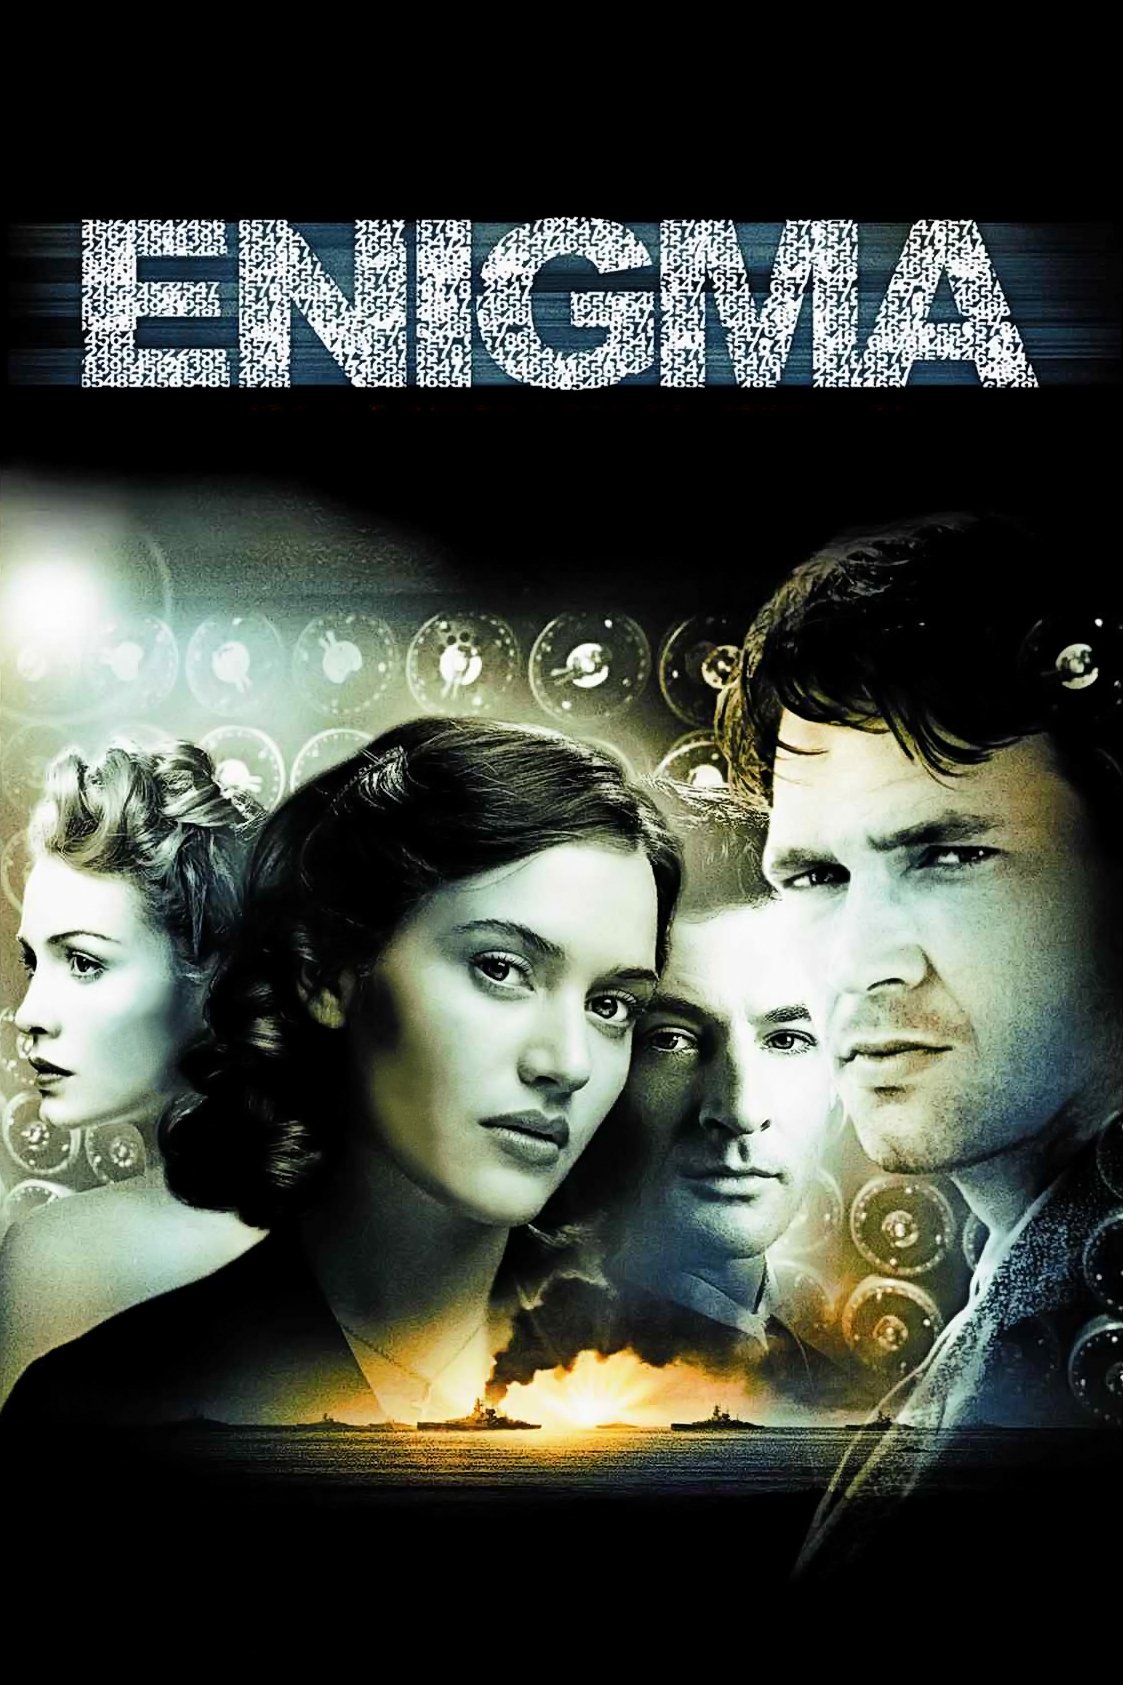 Poster for the movie "Enigma"